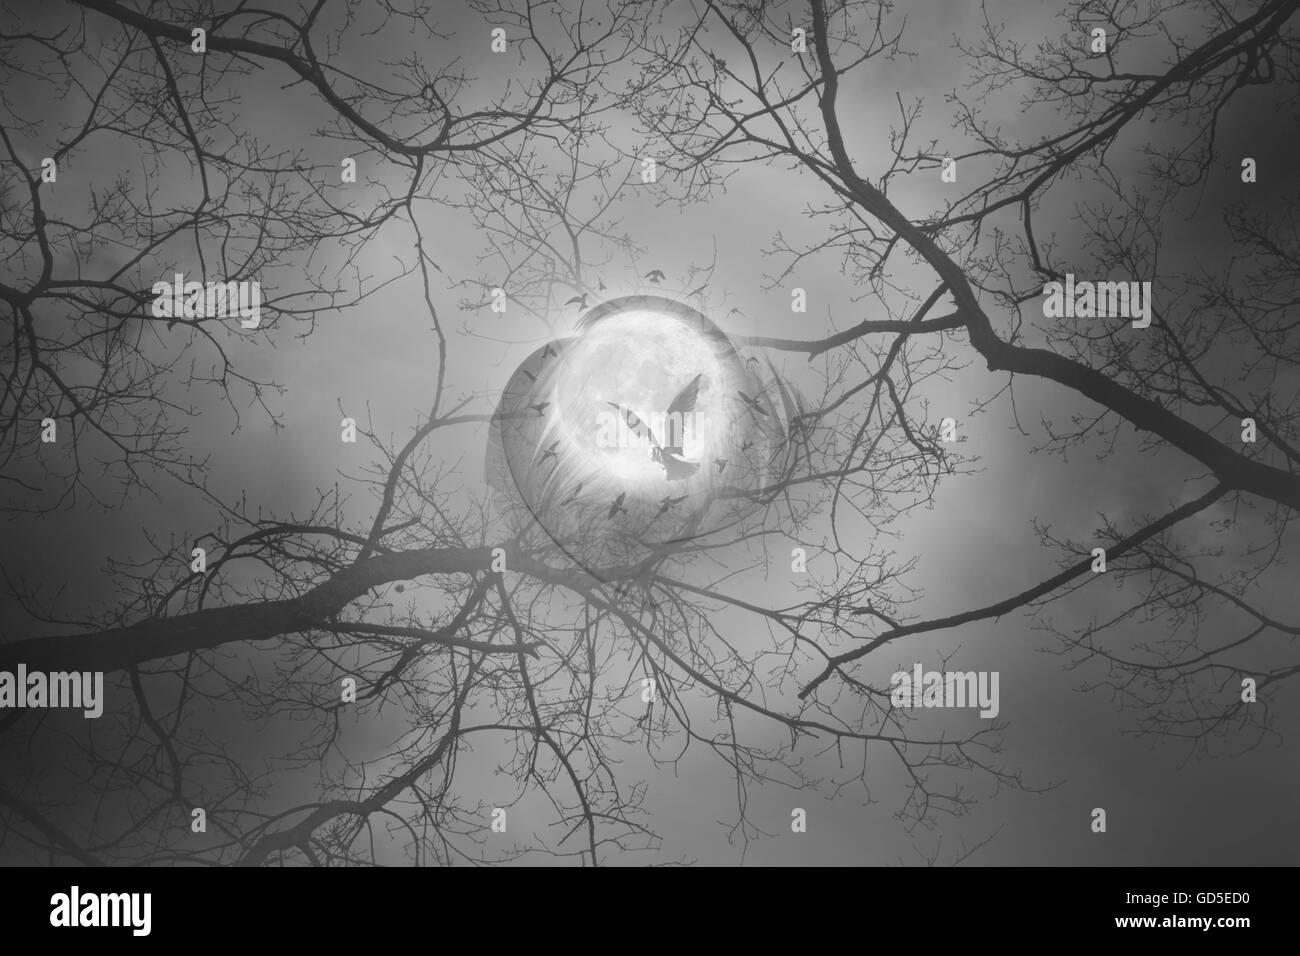 Mystic forest scene with a bird flying to a full moon, surrounded by a bird circle and feathers, with leafless branches. Stock Photo